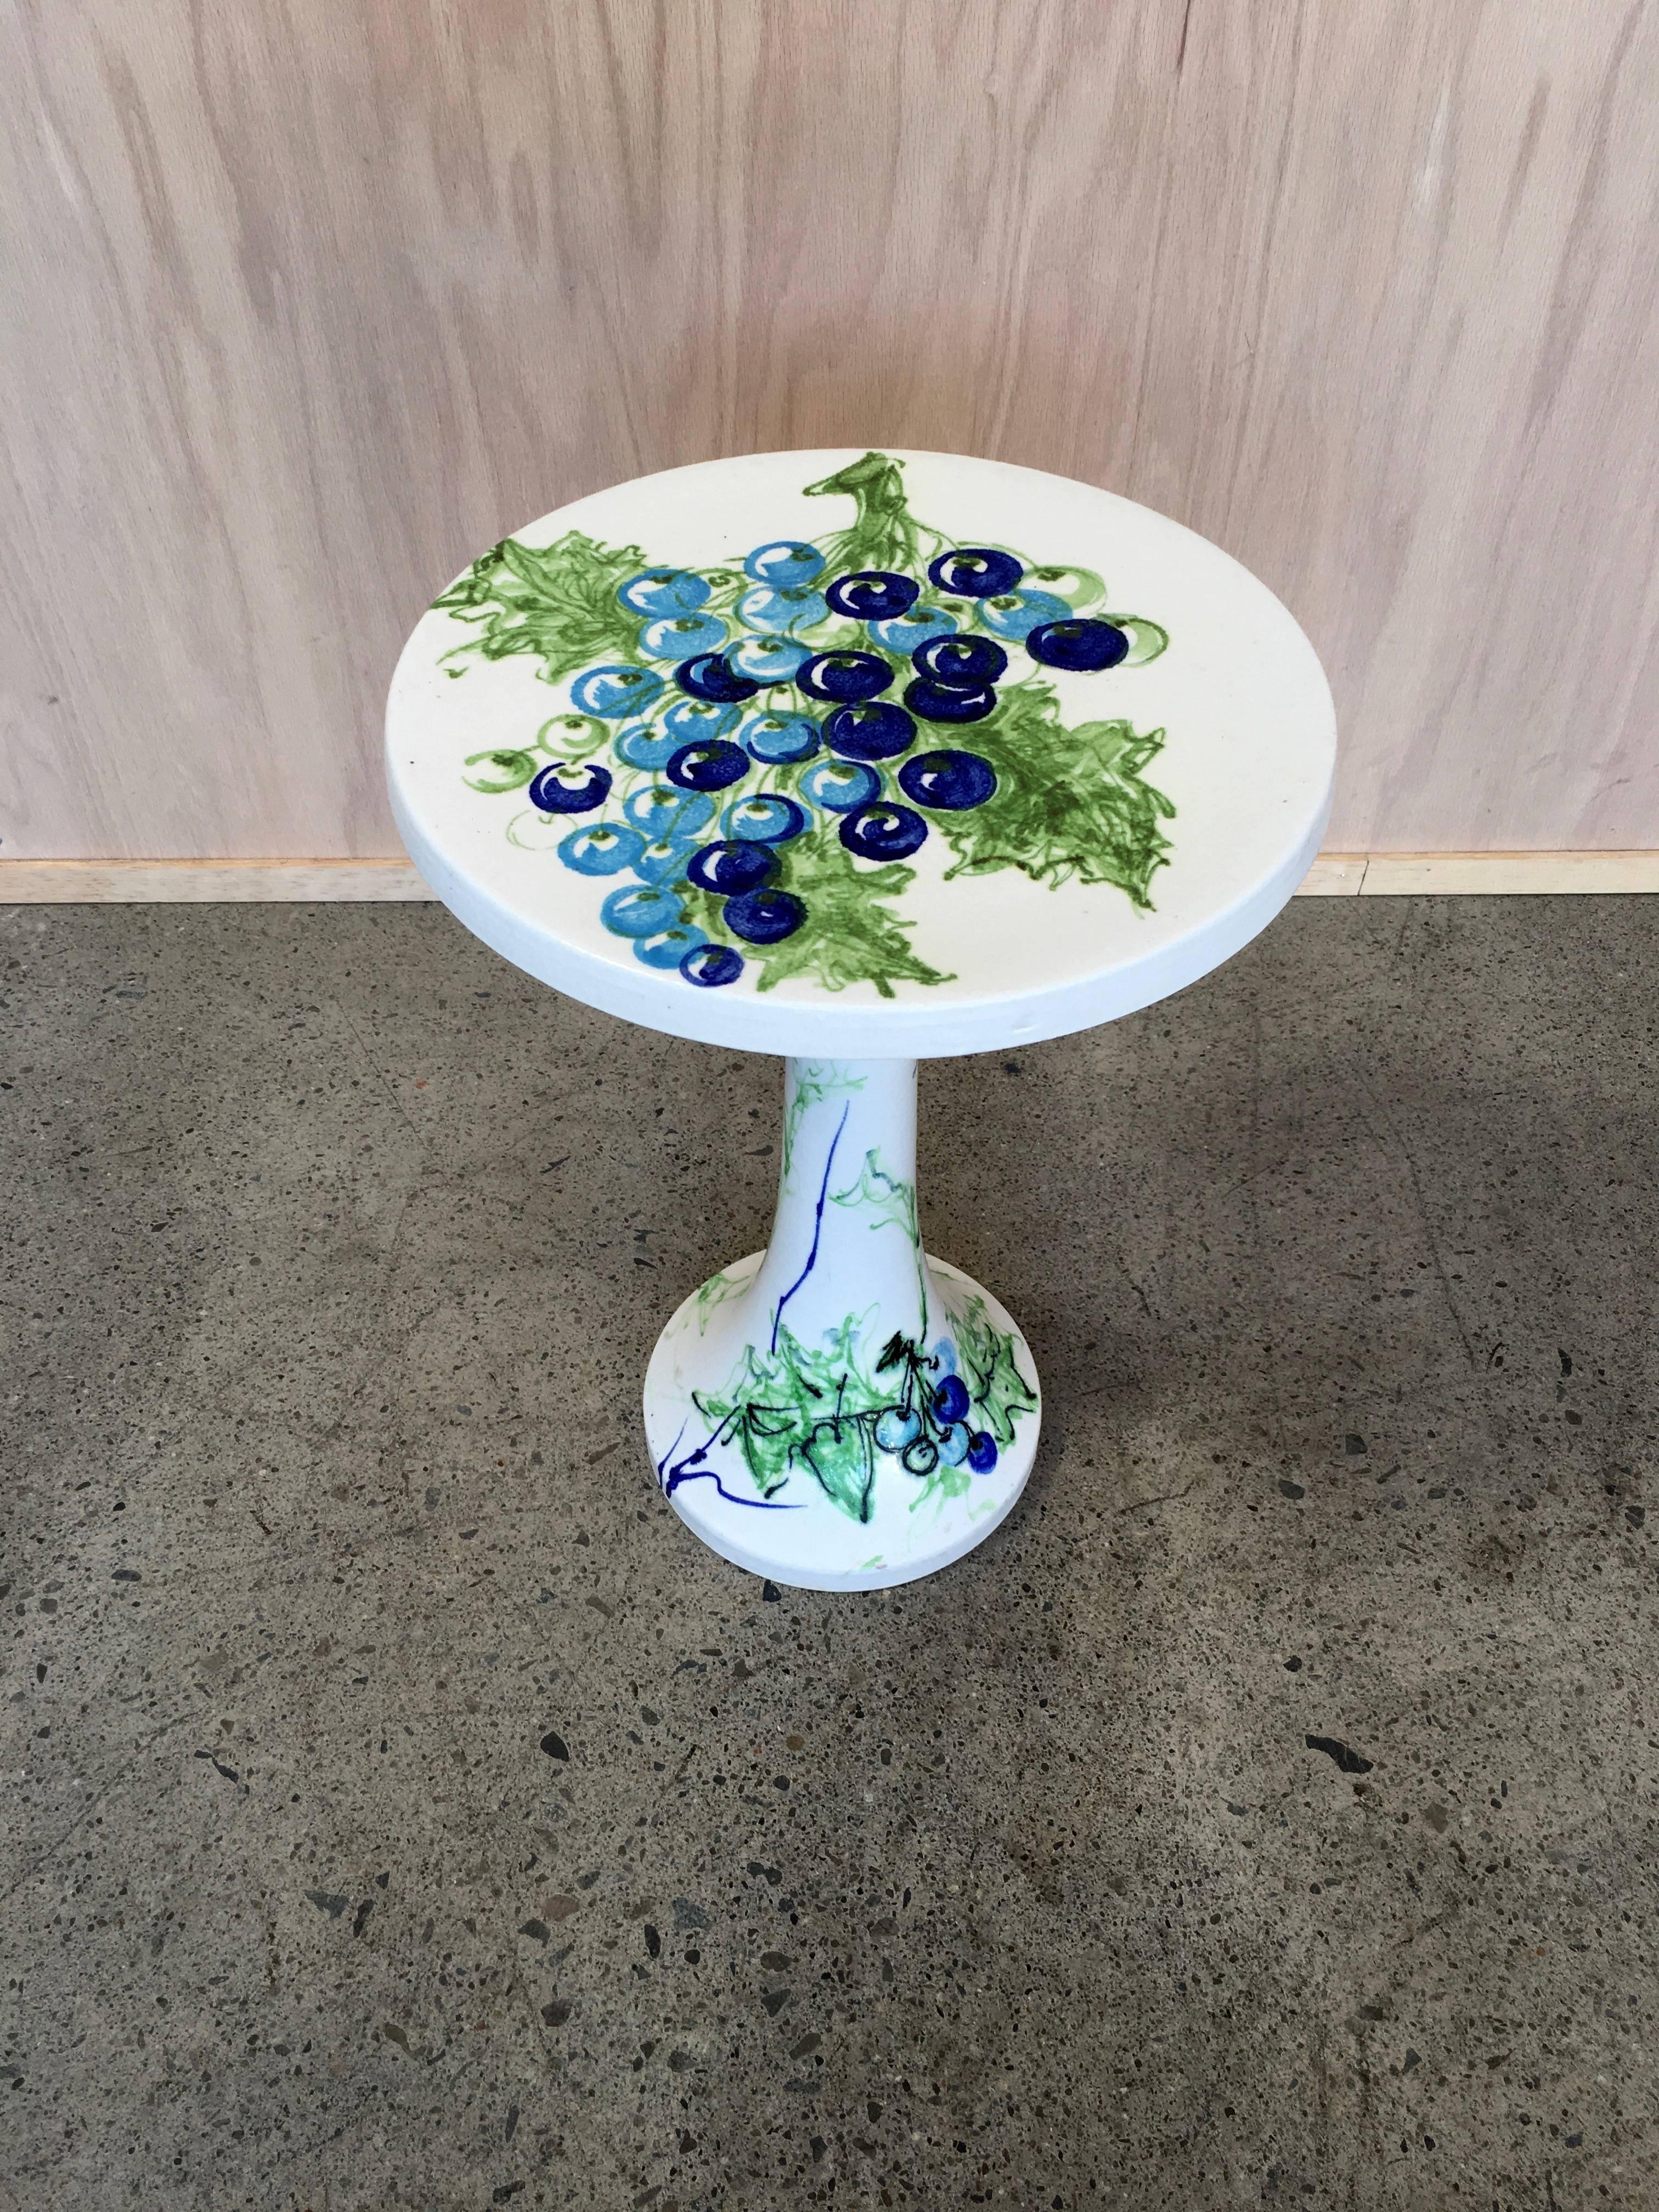 Raymor ceramic wine table with grapevine decoration.